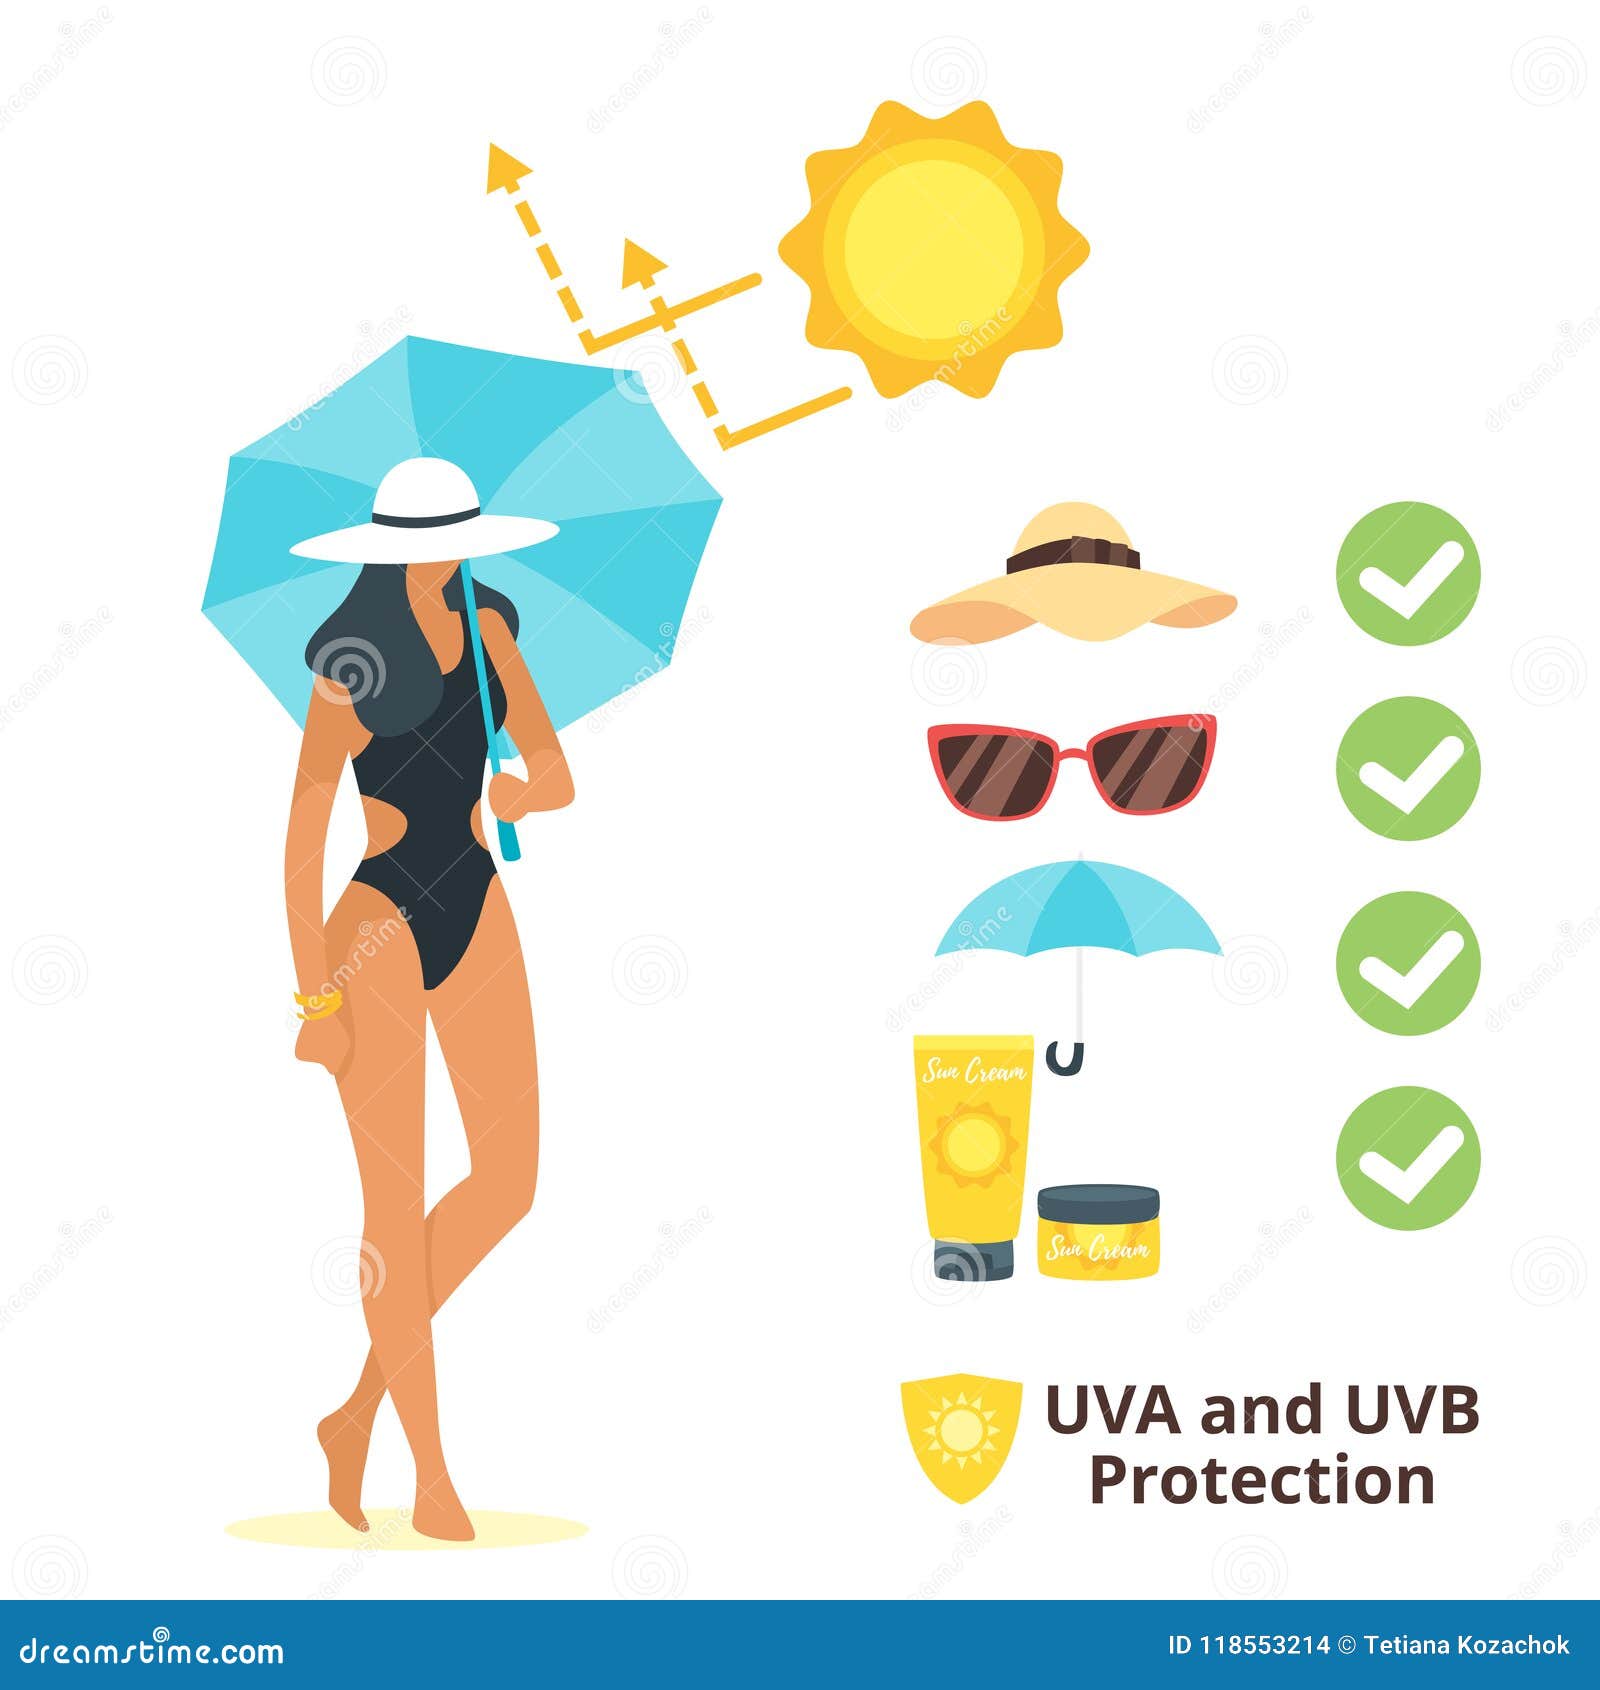 uva and uvb protection concept